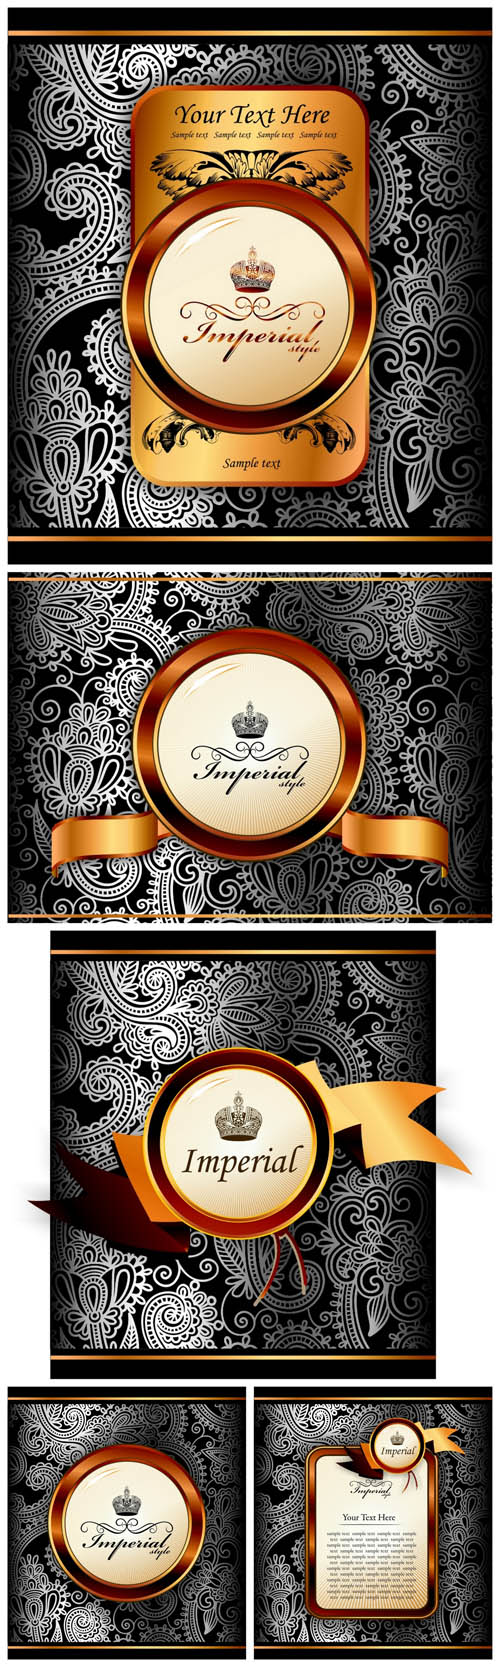 Silver Gold Vector Backgrounds - Gold, Silver, patterns, vector, background